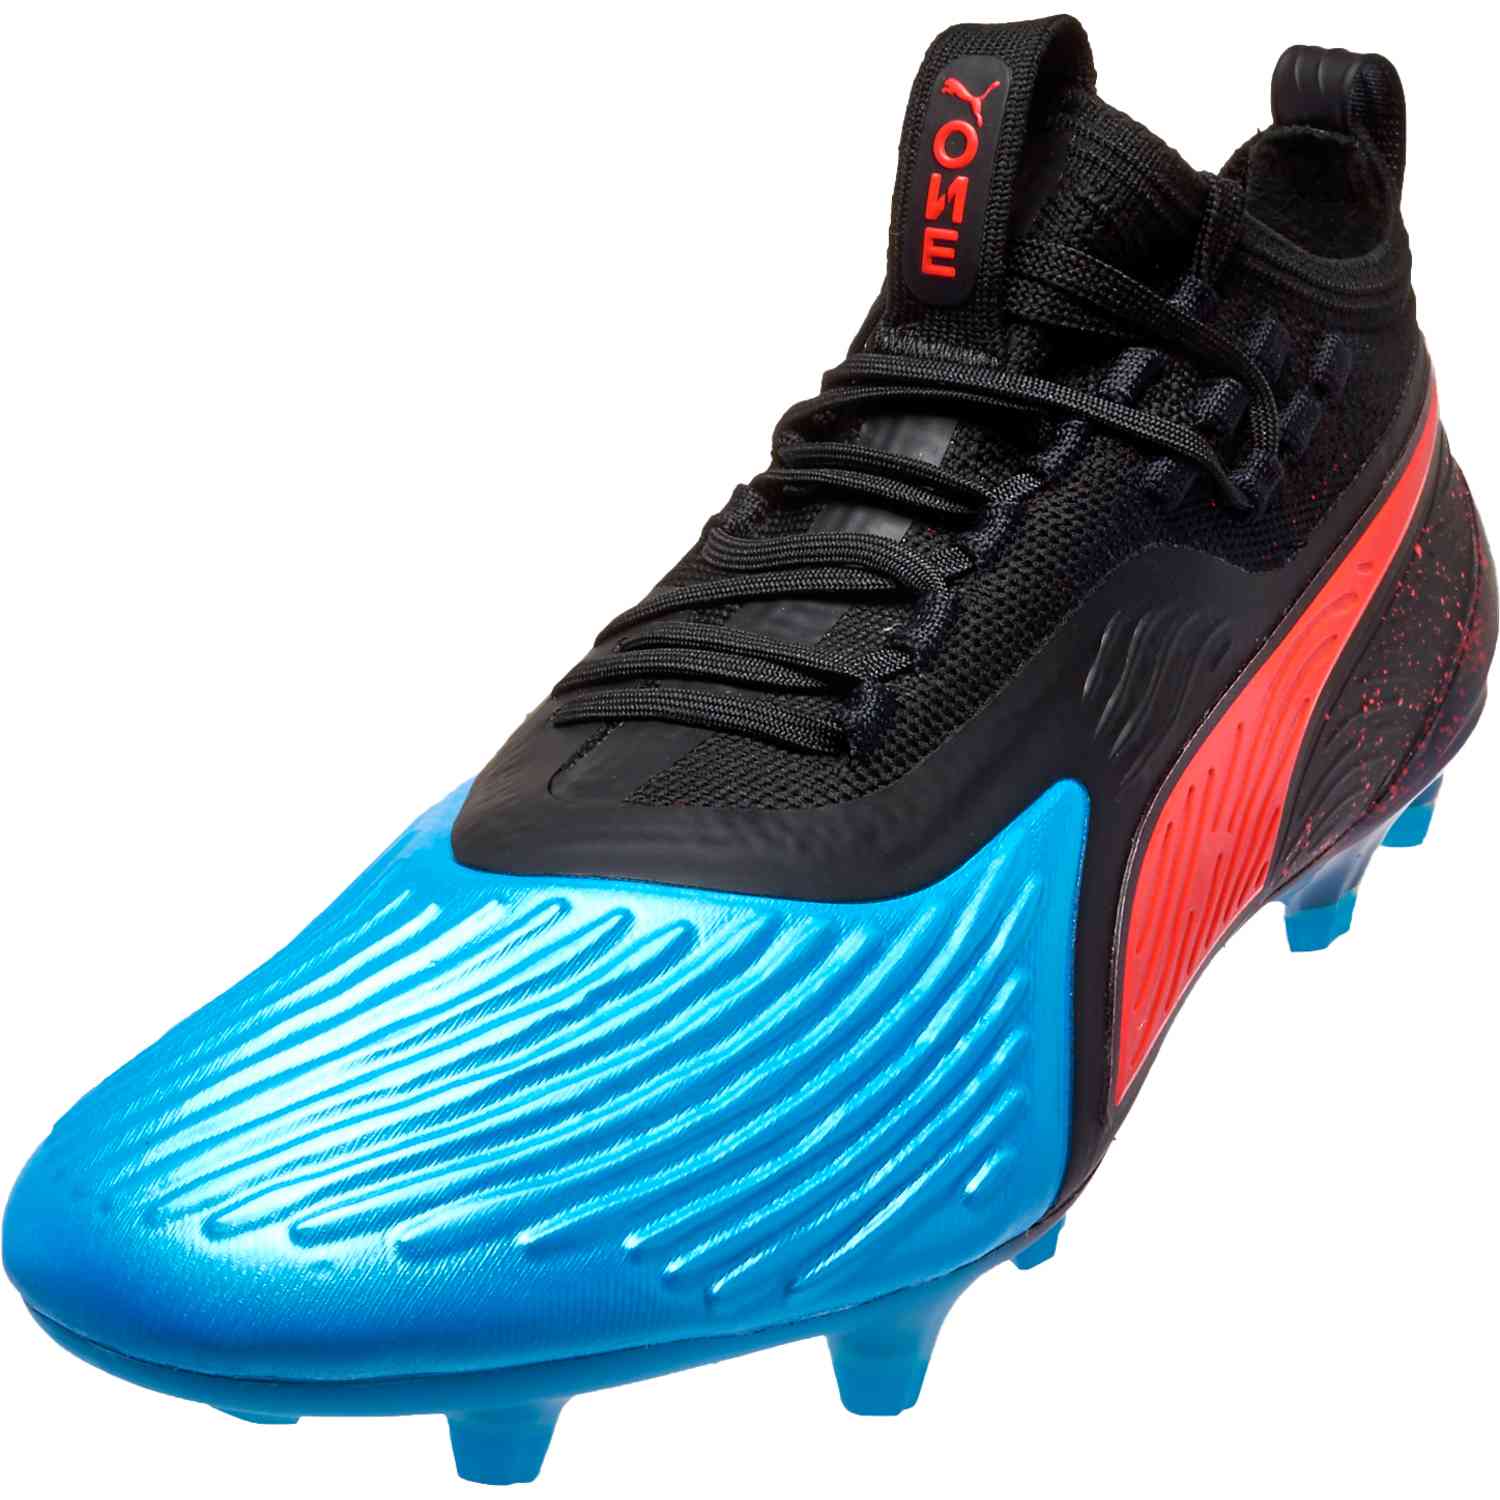 puma one 19.1 synthetic